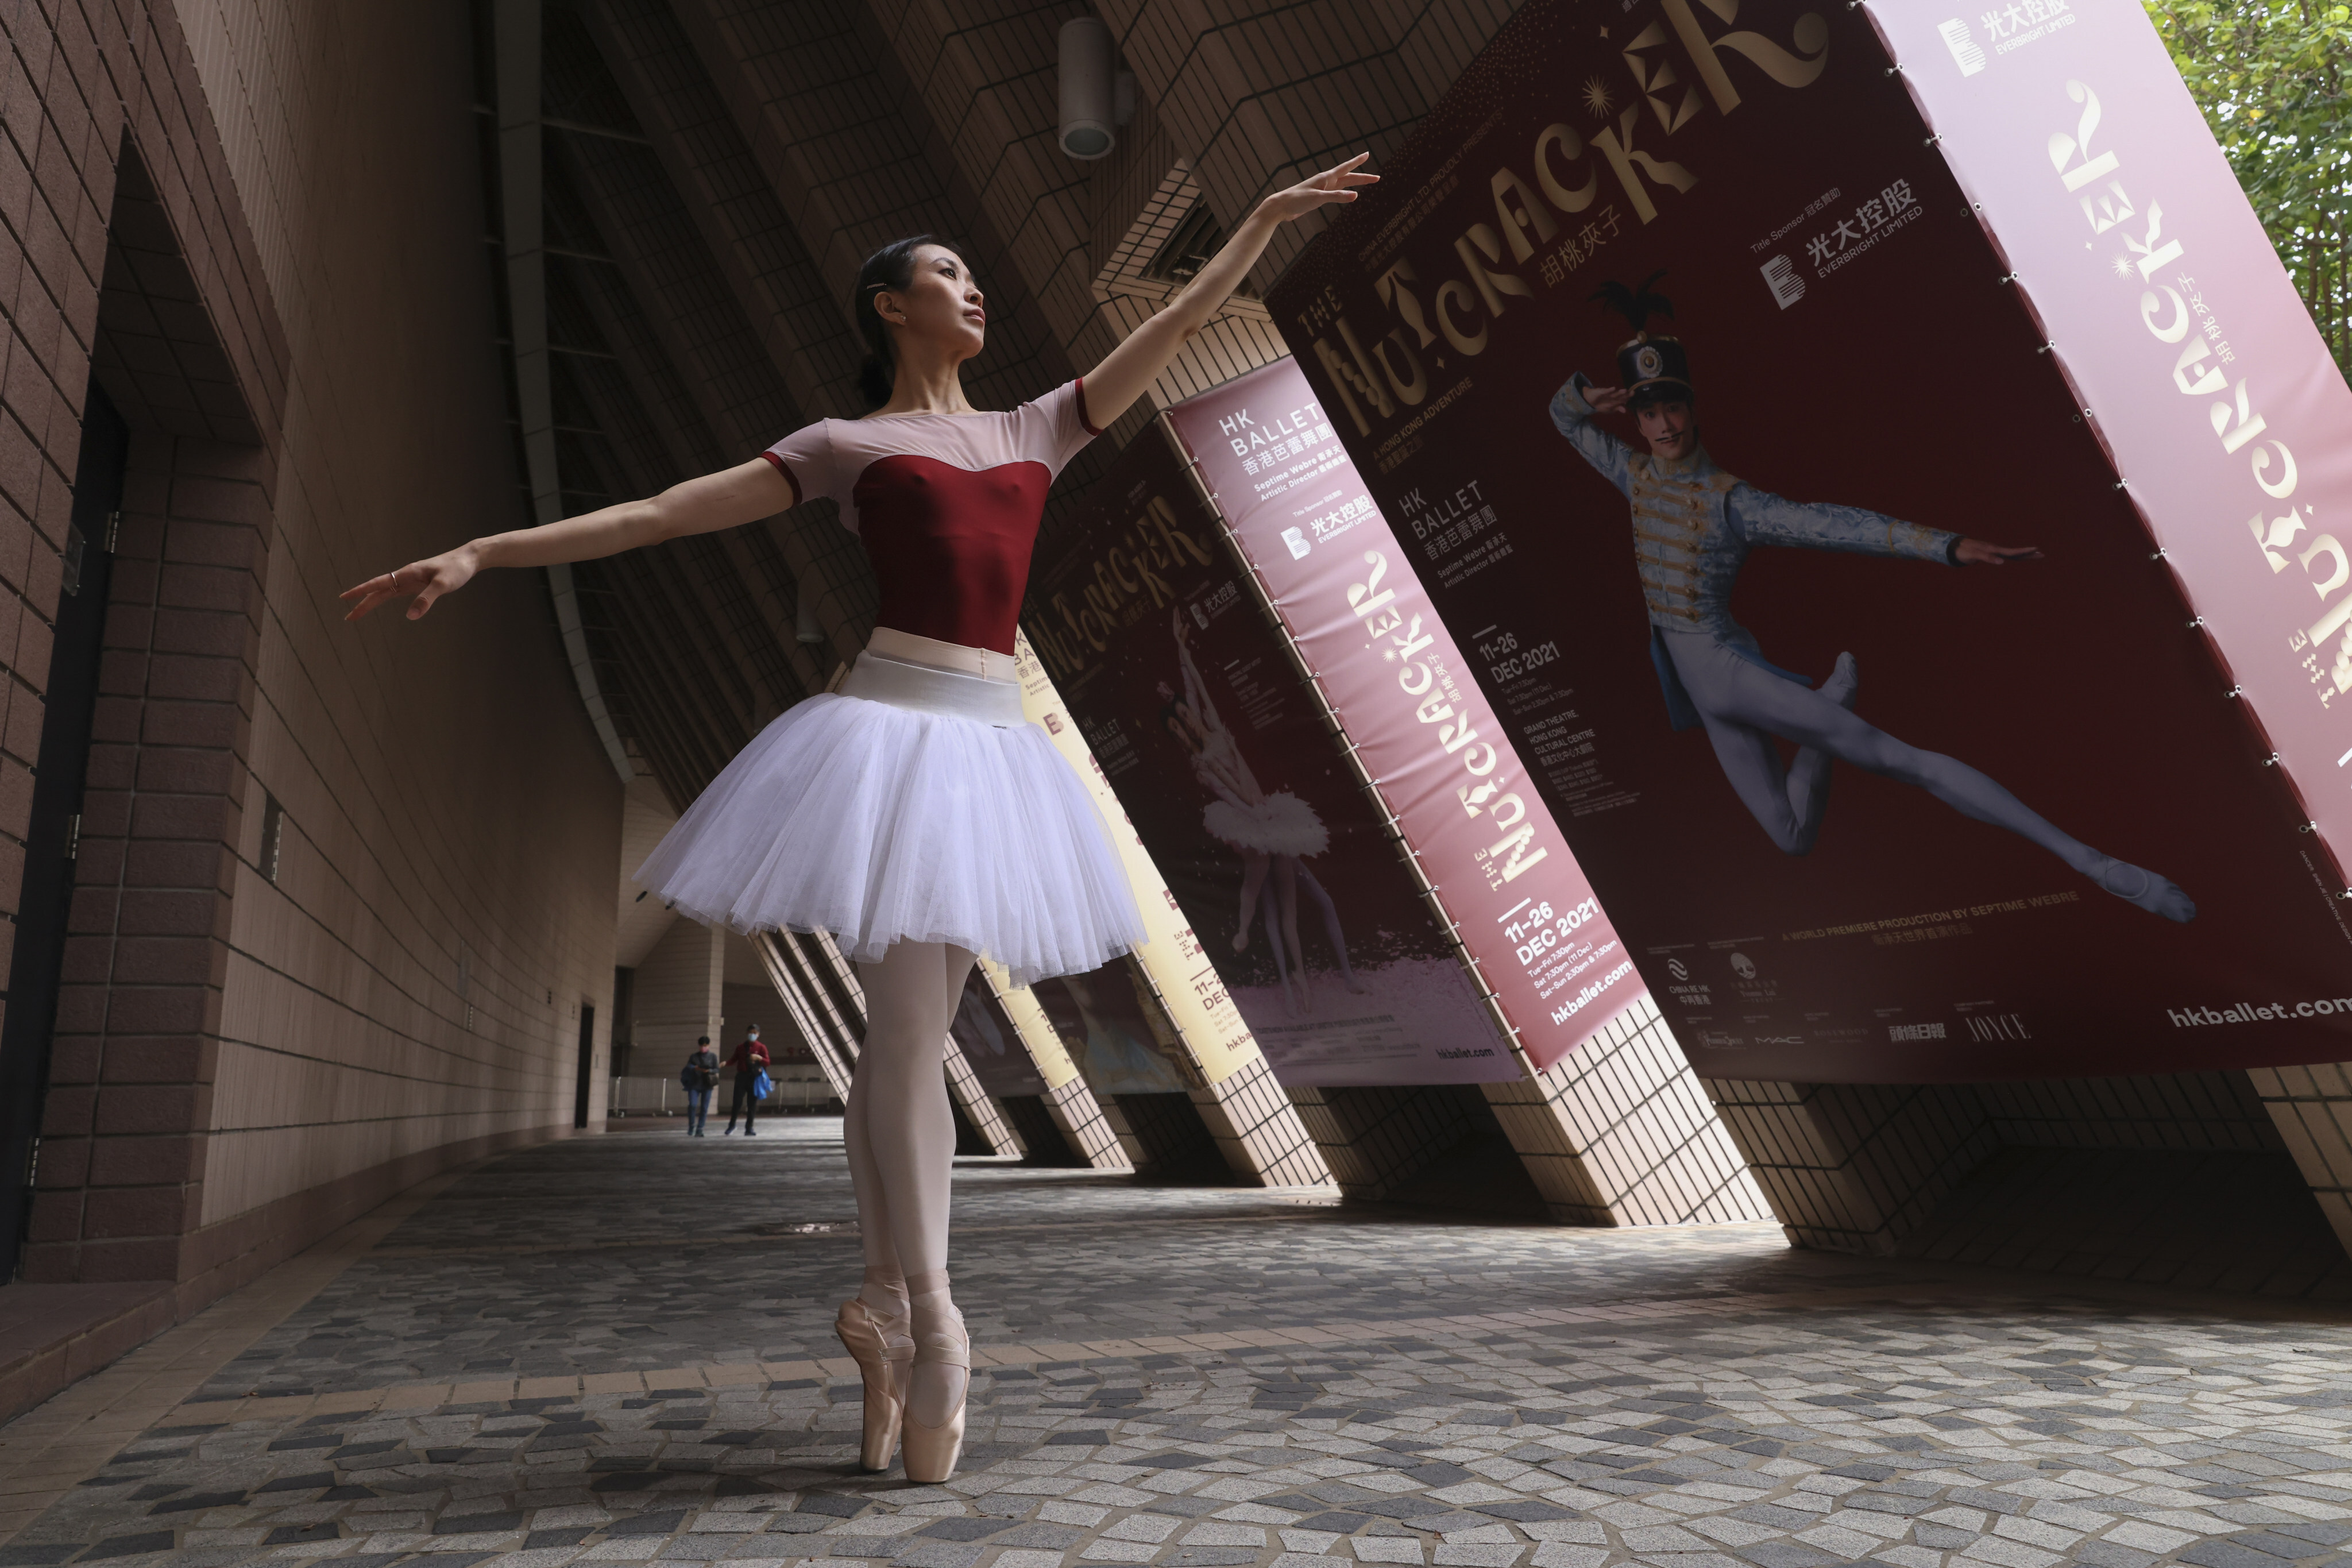 Ye Feifei is principal ballerina with the Hong Kong Ballet. She will dance the lead role in The Nutcracker at the Hong Kong Cultural Centre in Tsim Sha Tsui. Performances begin on December 11. Photo: Dickson Lee